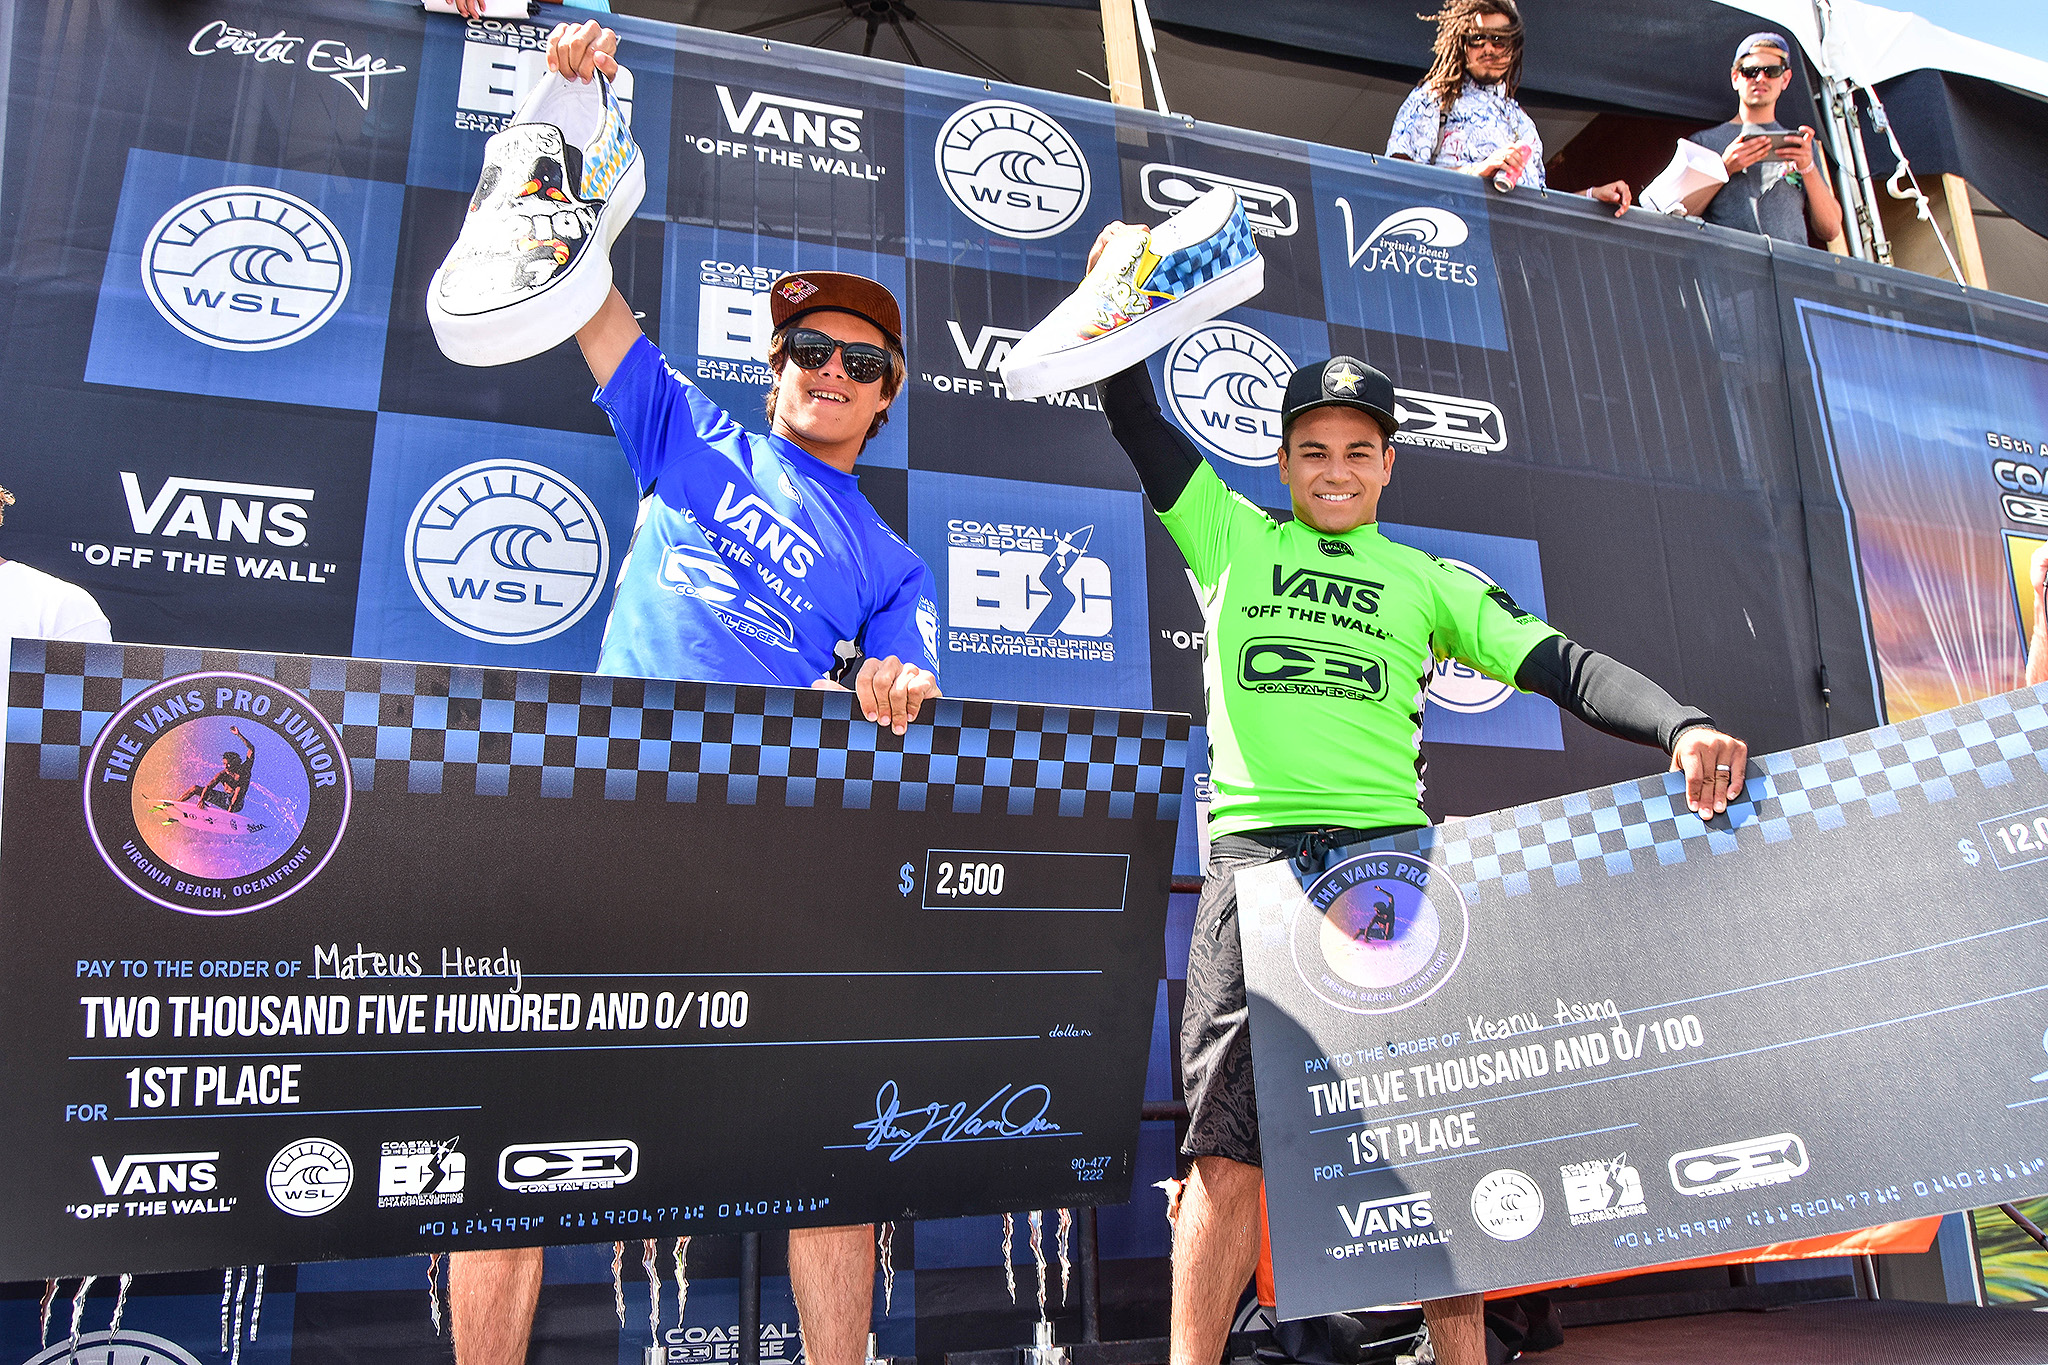  Keanu Asing and Mateus Herdy Claimed Massive Wins in Virginia Beach at Vans Pro and Junior Pro.